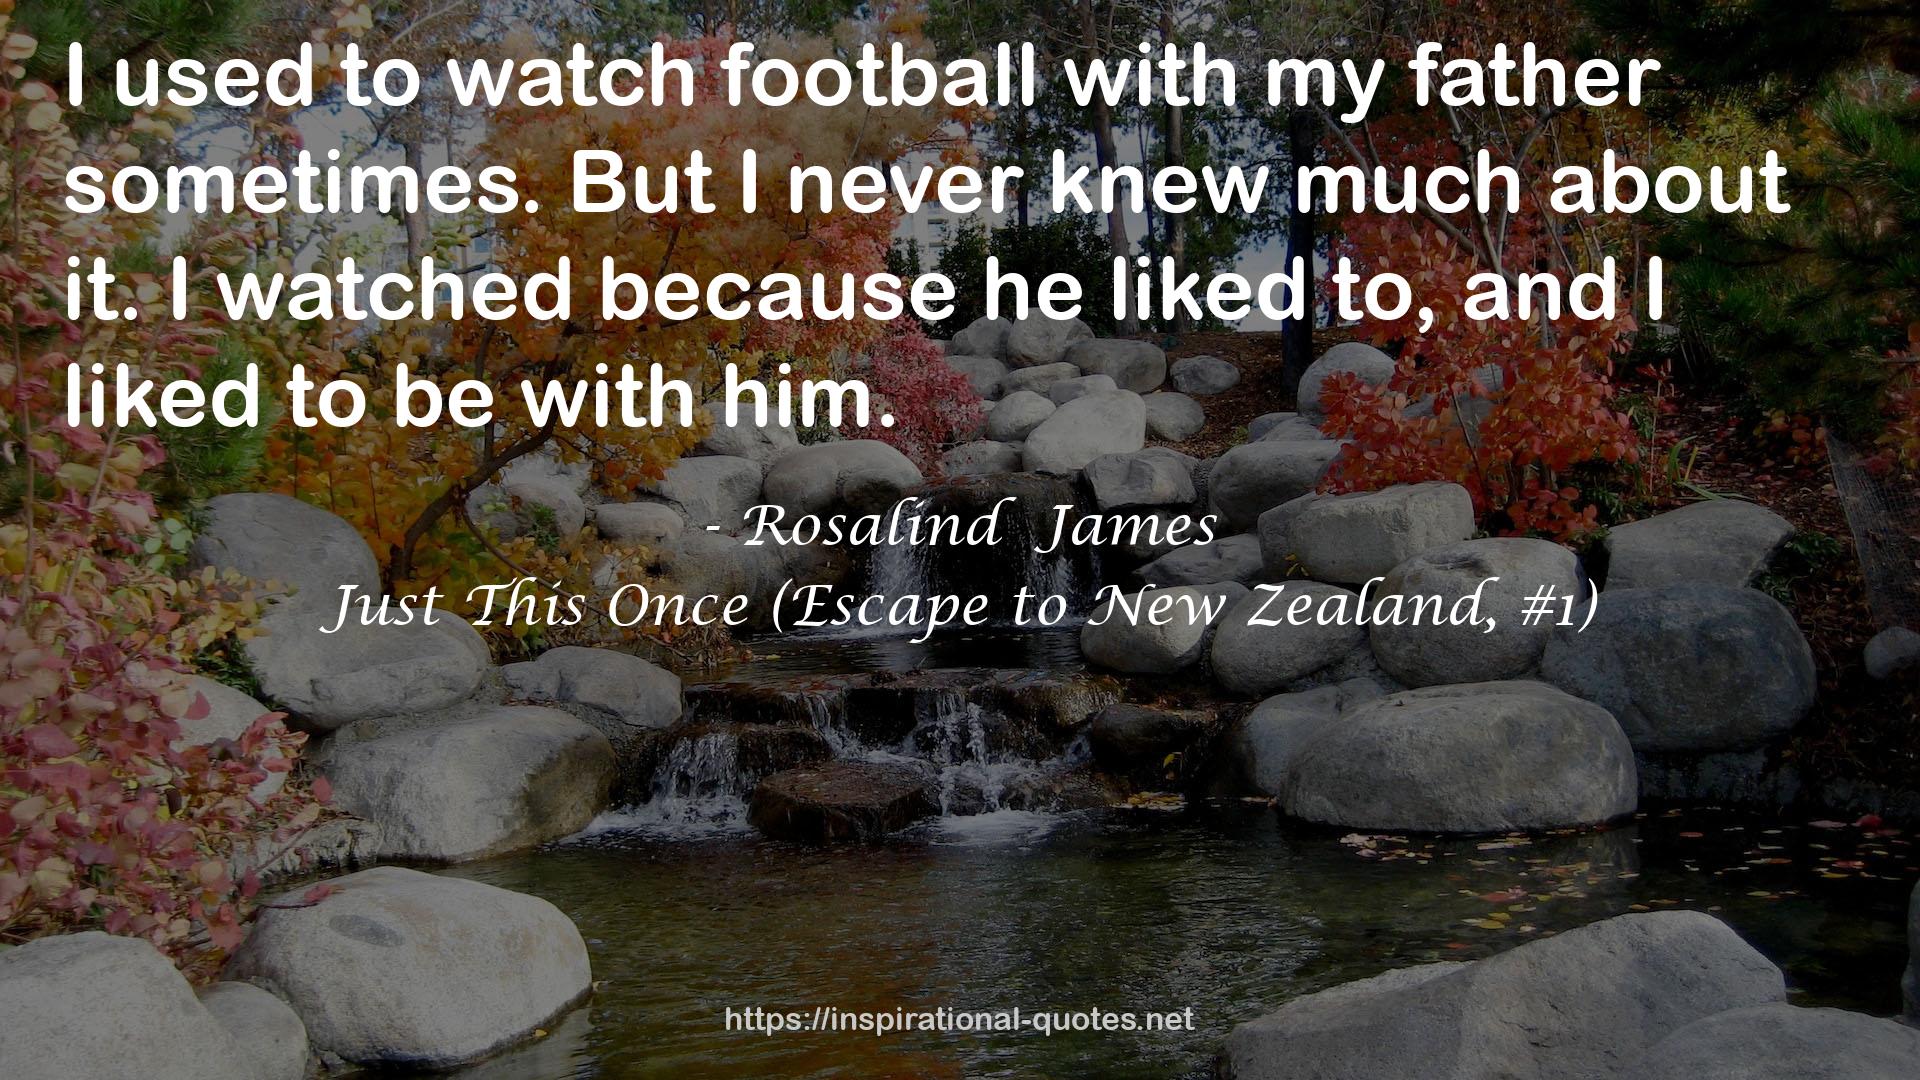 Just This Once (Escape to New Zealand, #1) QUOTES